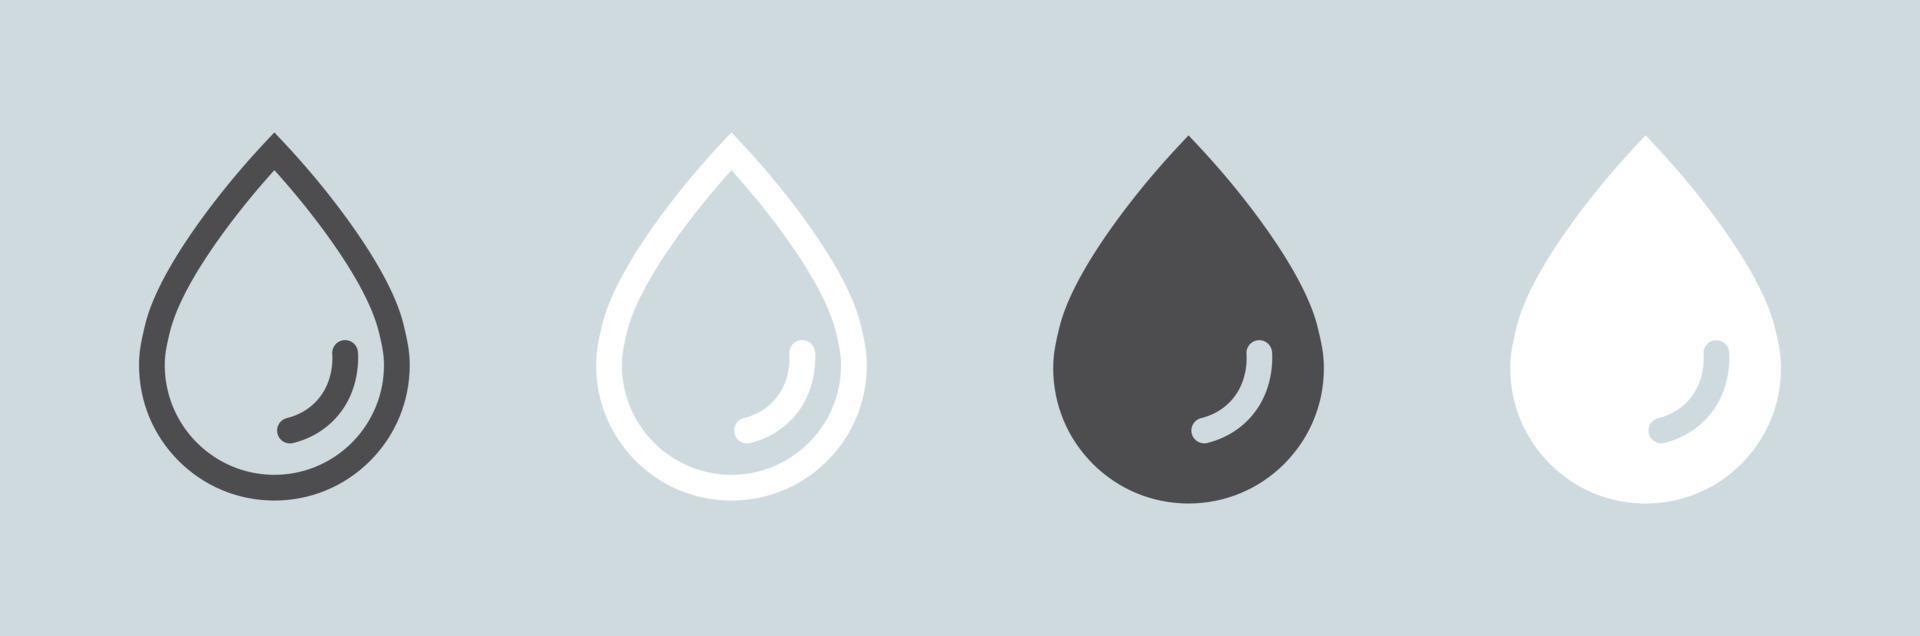 Water drop outline and solid icon. Water or oil drop sign. vector